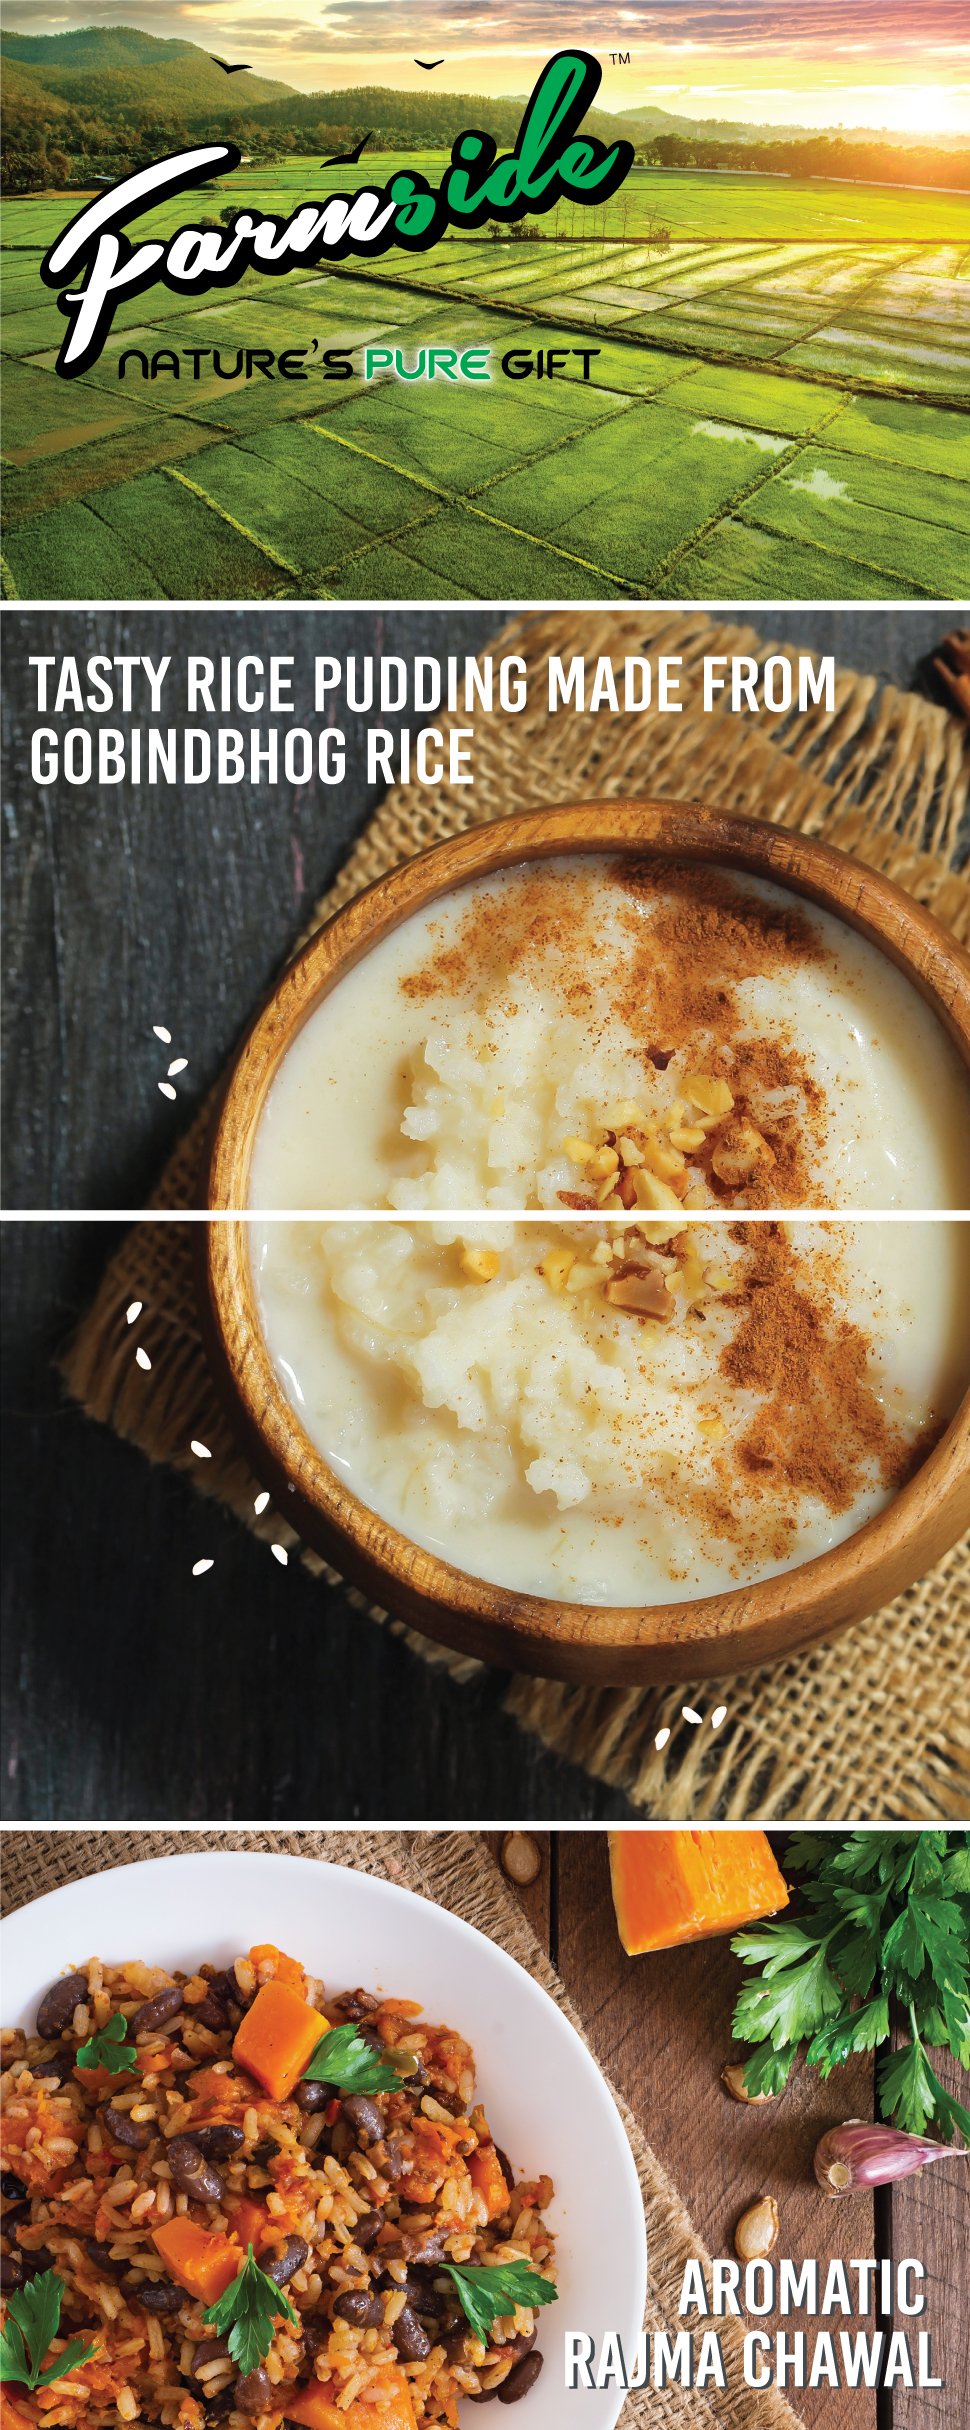 Image A plus content for Farmside Gobindobhog rice with image of Kheer and Rajma Chawal made from Gobindobhog Rice